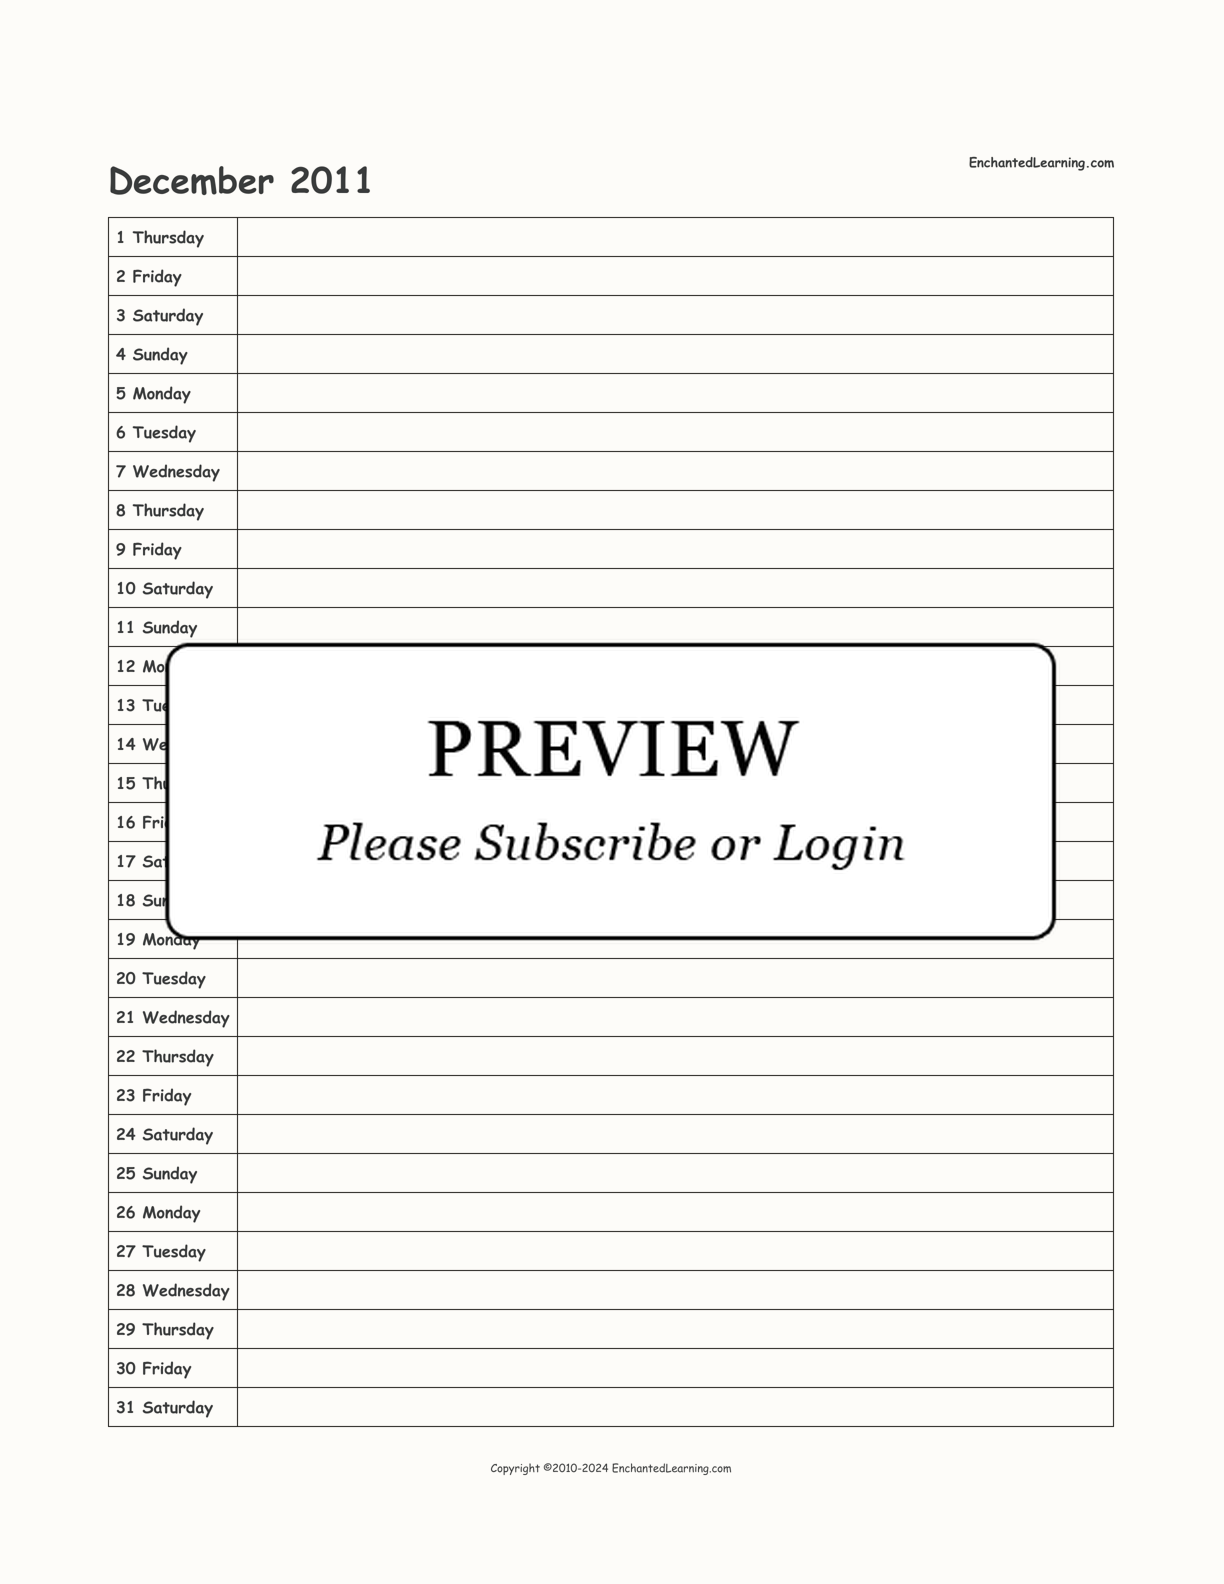 2011 Scheduling Calendar interactive printout page 12